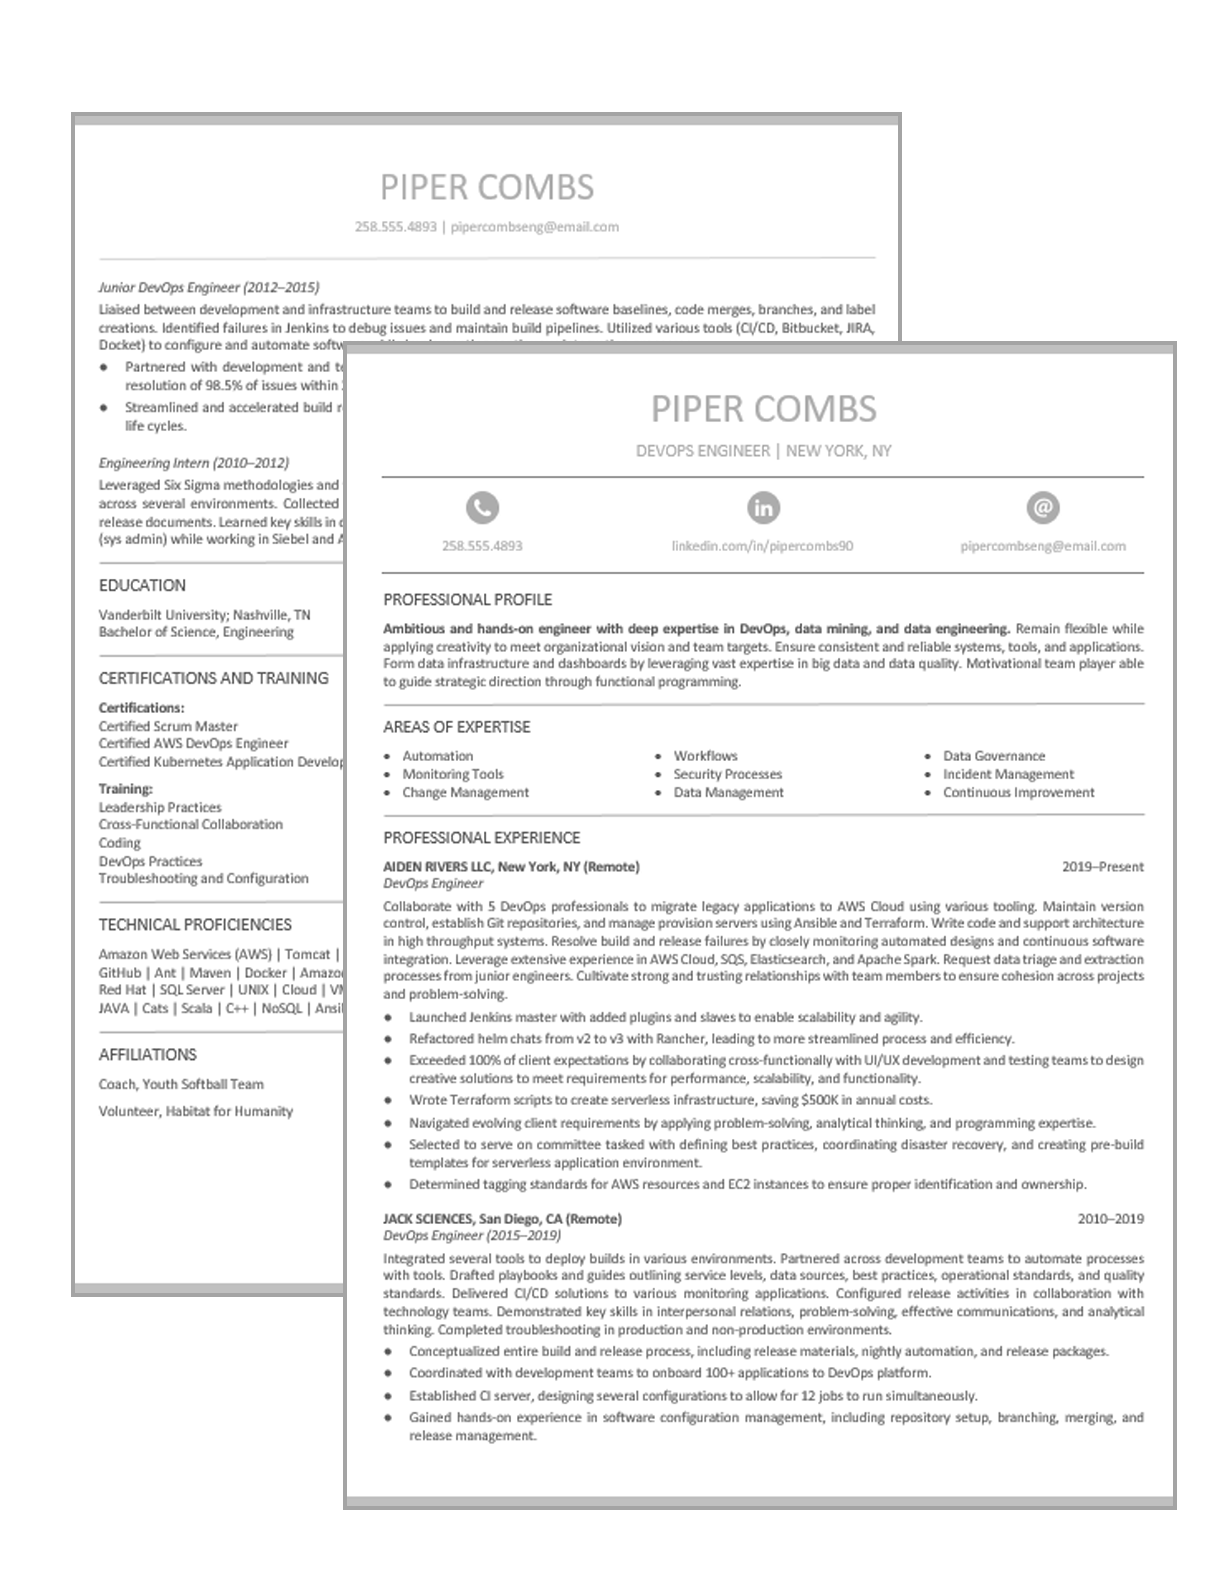 Scrum Master Resume Example - full 2 page resume